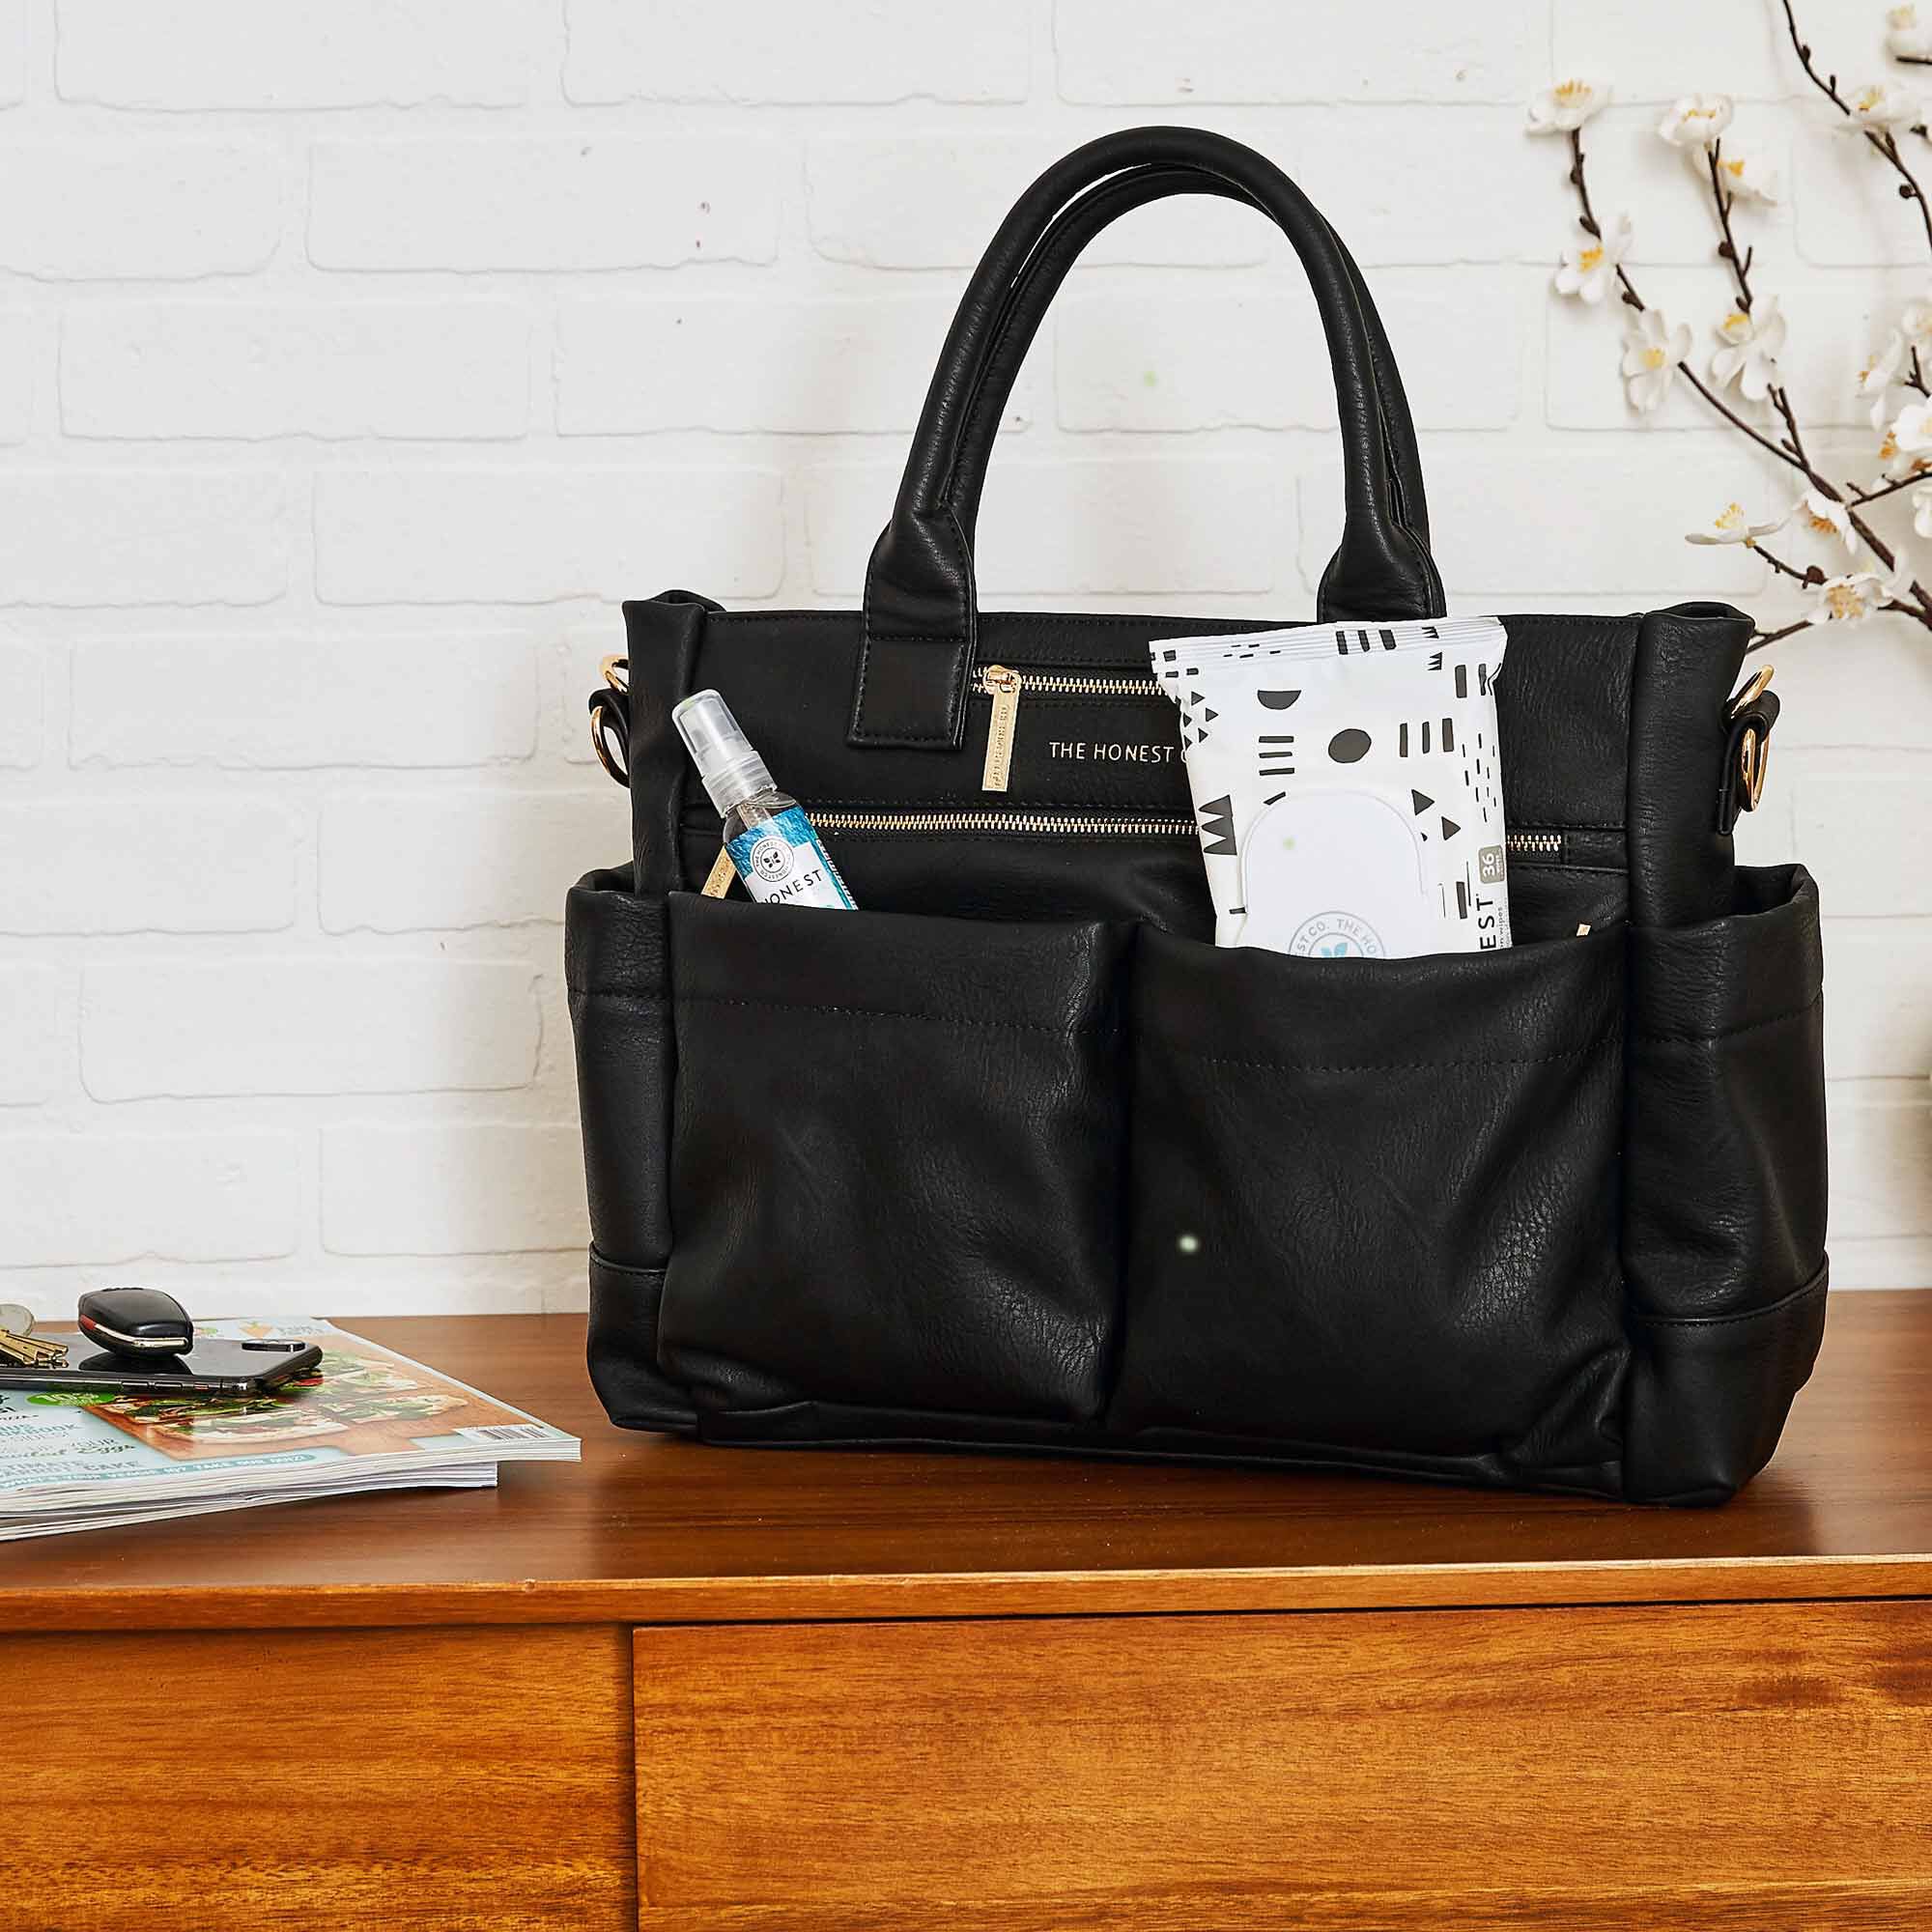 Everything tote with wipes and hand sanitizer in a home setting